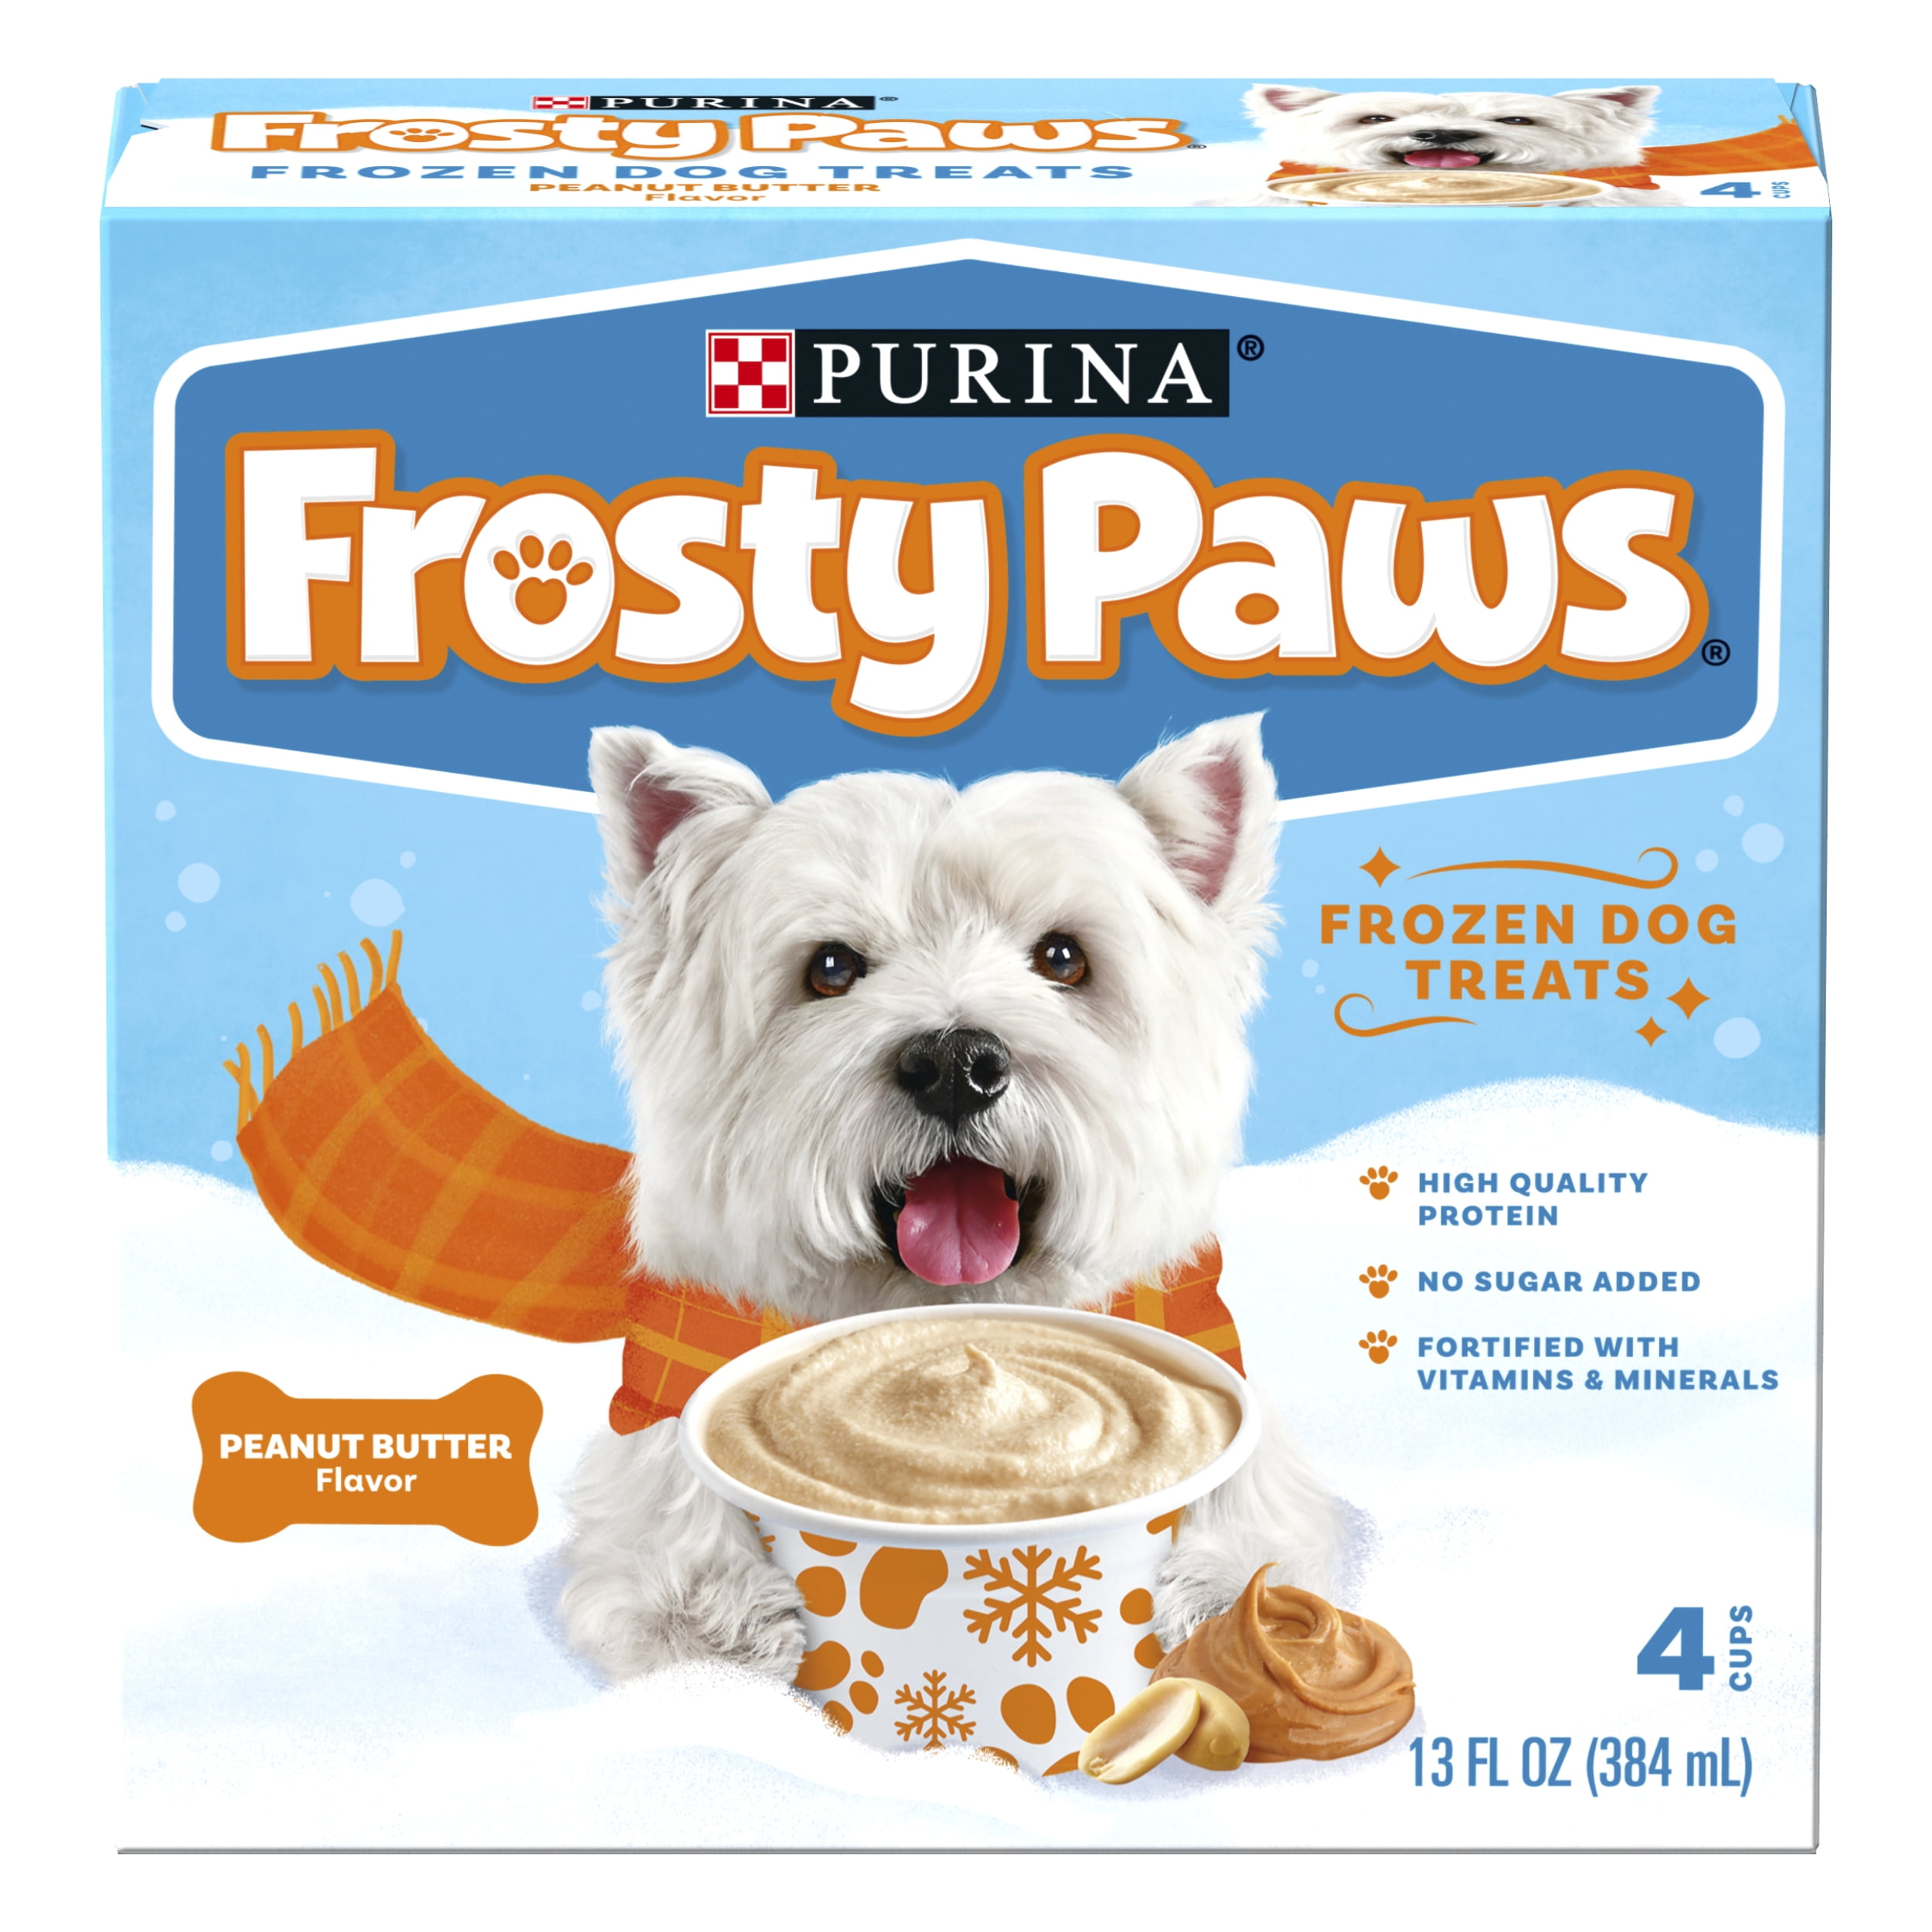 Purina FROSTY PAWS Peanut Butter Flavor Frozen Dog Treats - 4 Count